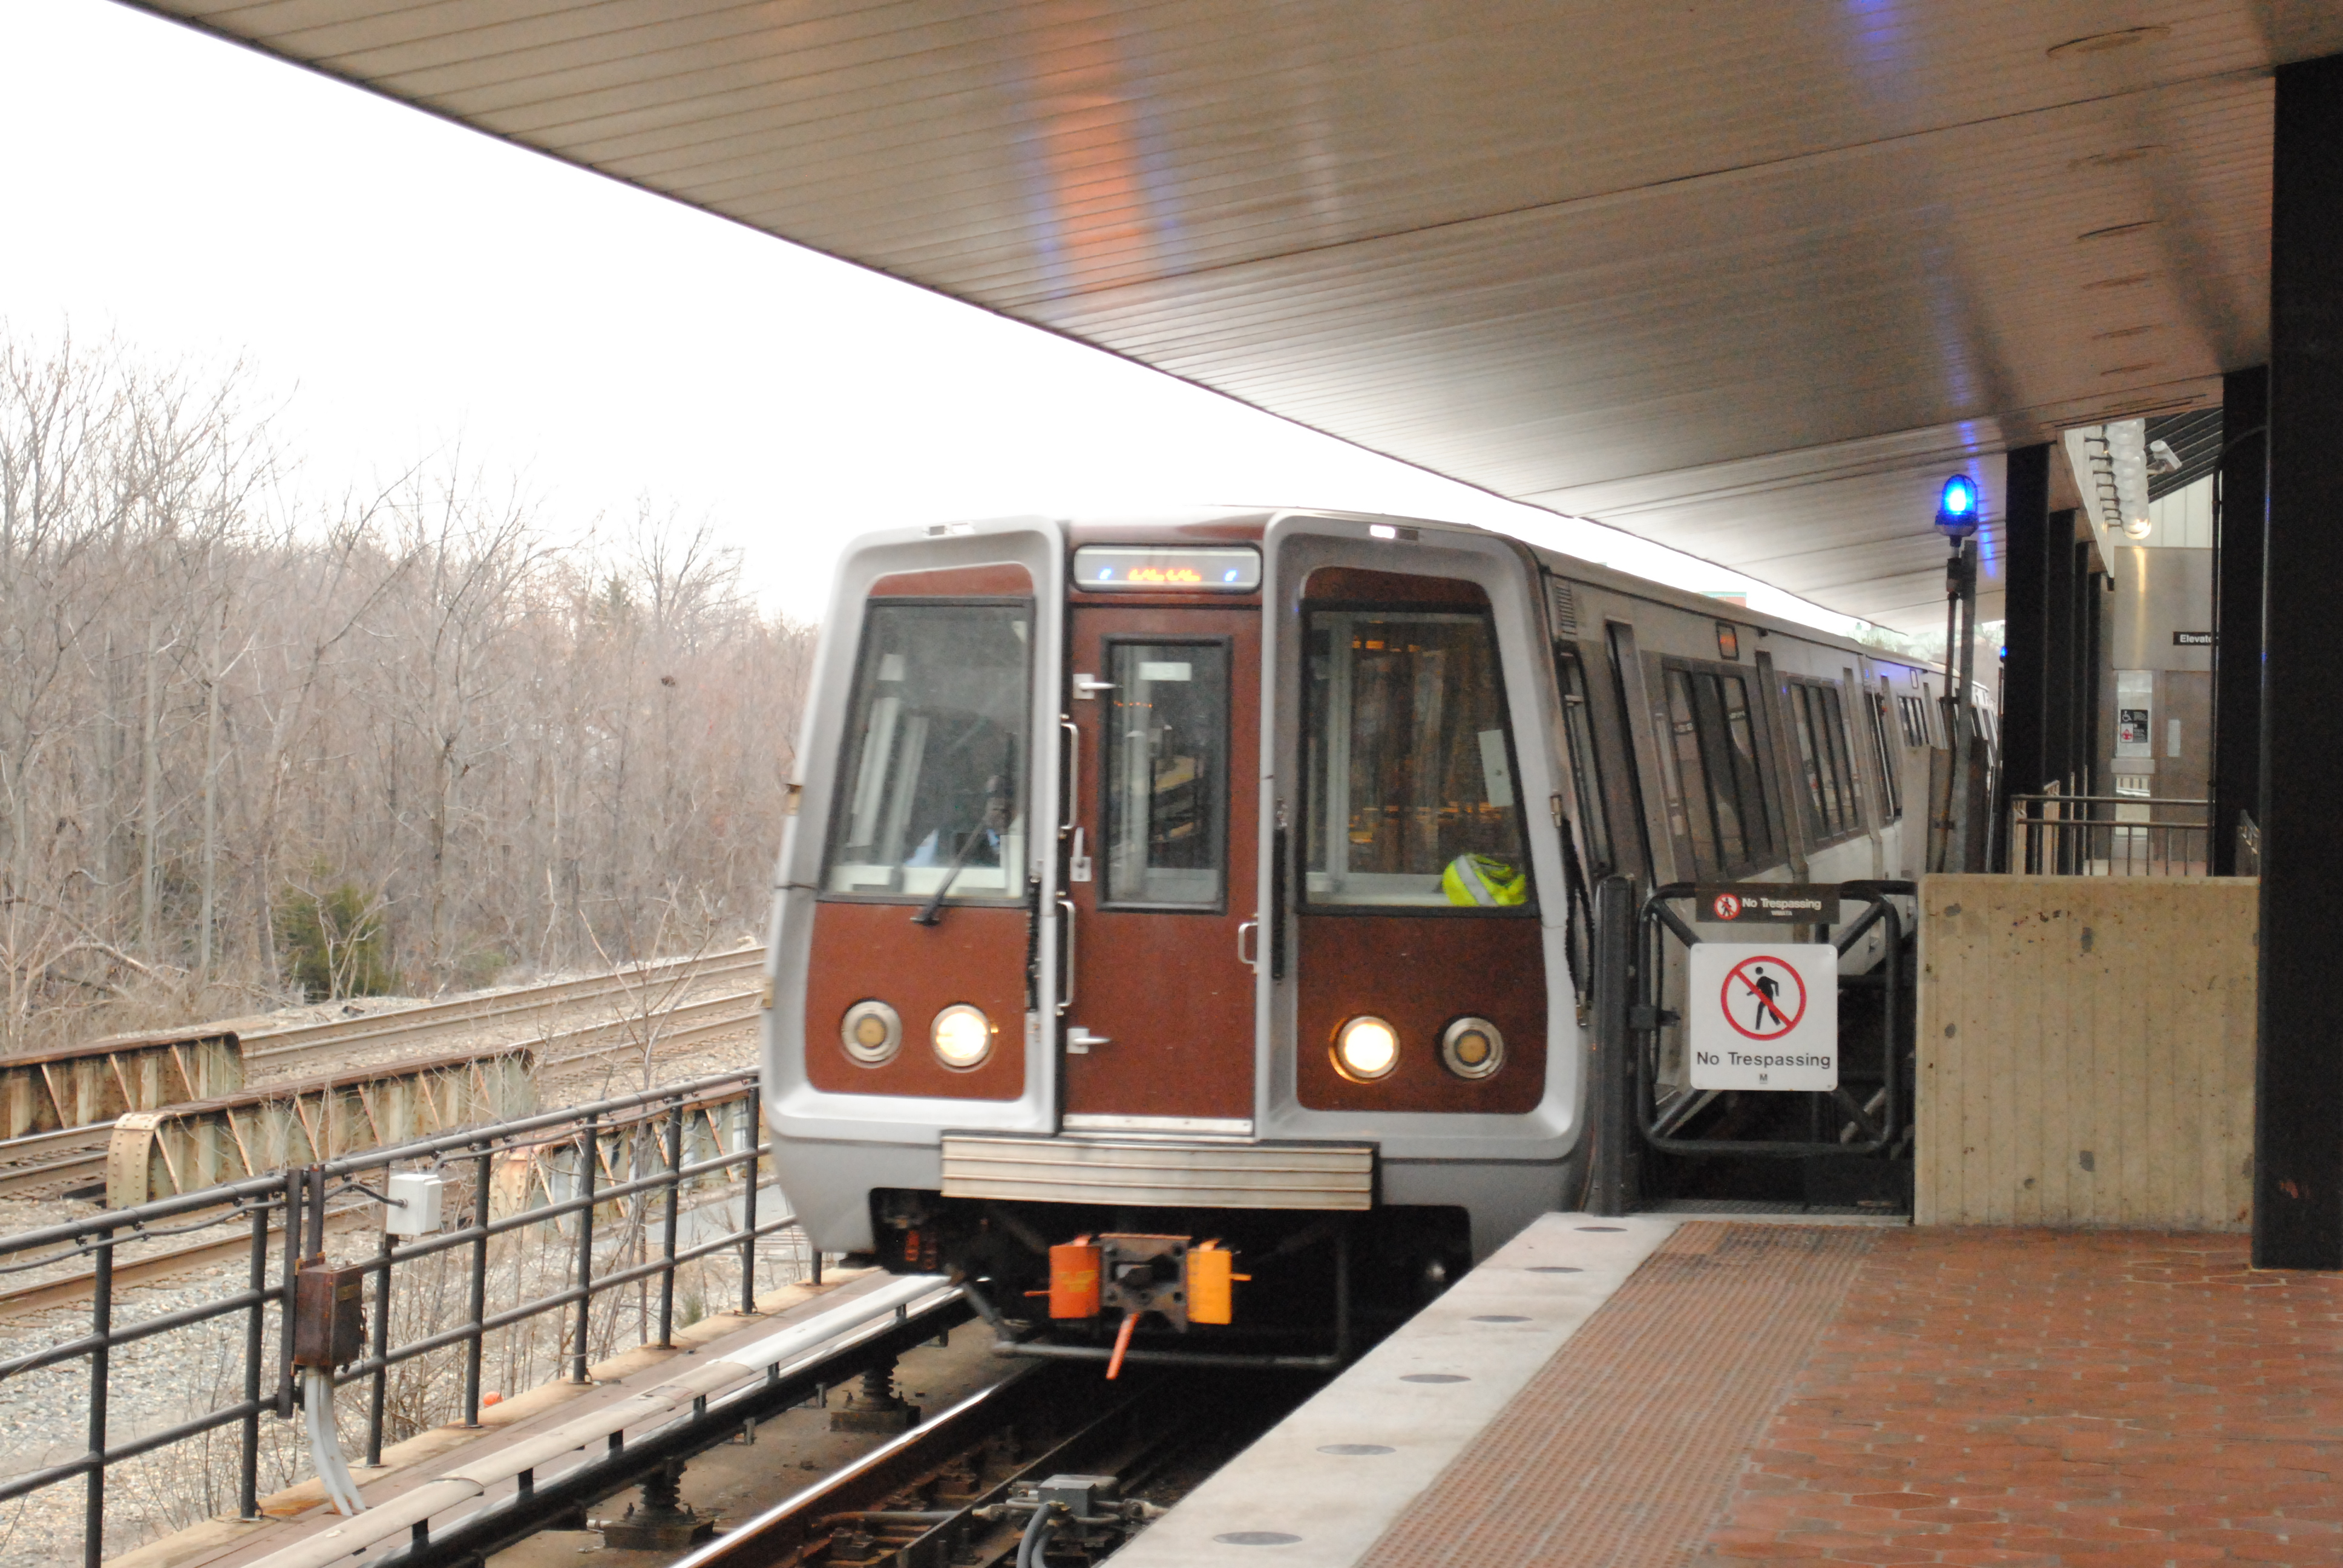 Updated: Negotiations ongoing over possible Metro strike